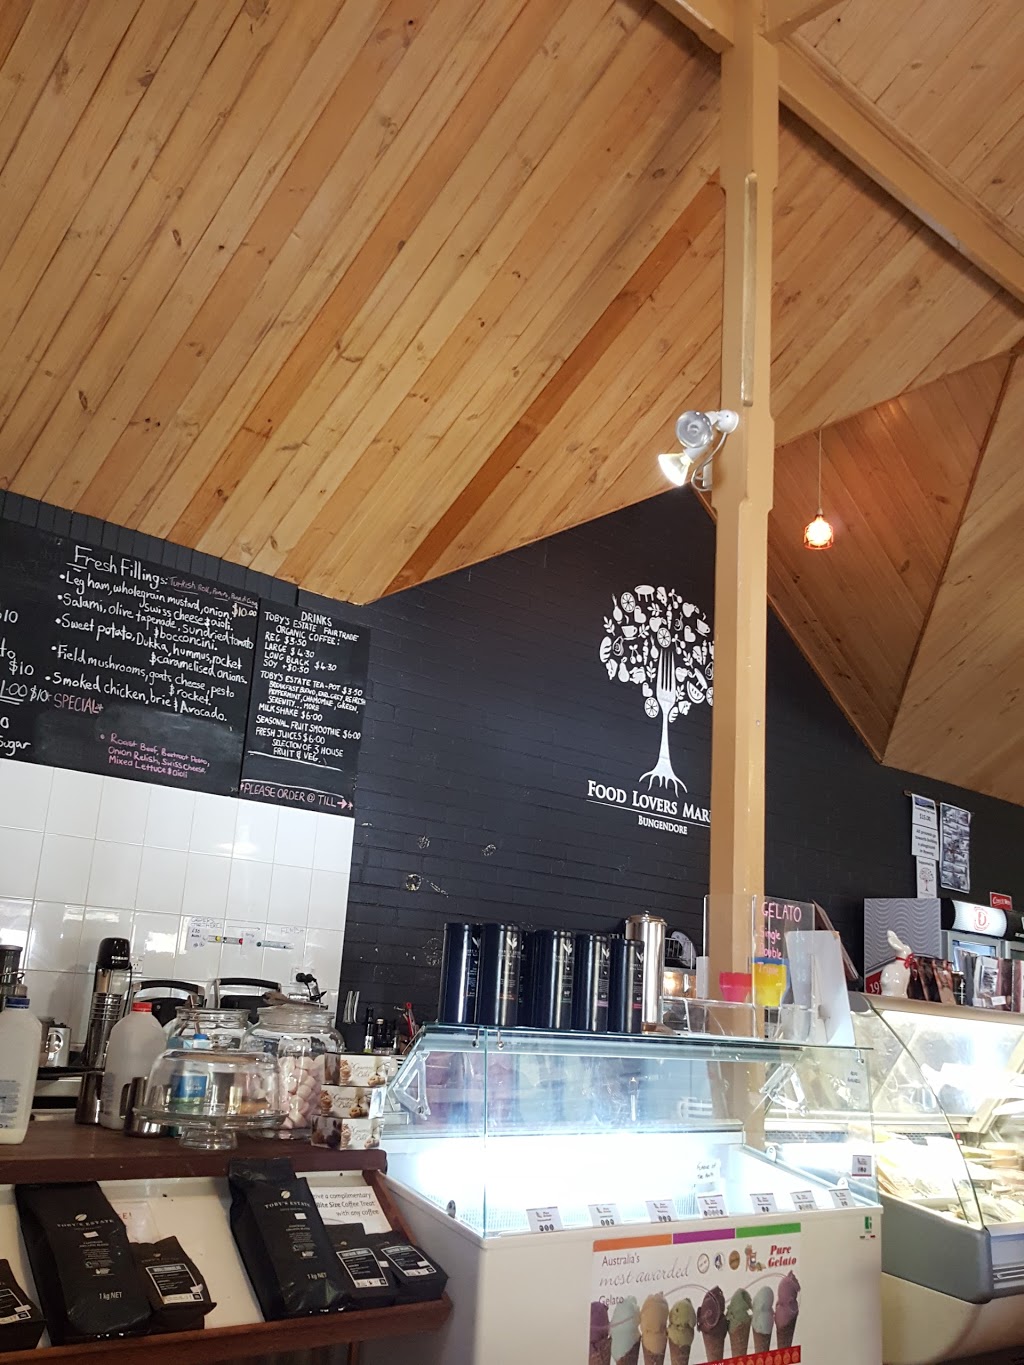 Bungendore Food Lovers Café and Market | cafe | 50 Molonglo St, Bungendore NSW 2621, Australia | 0262380018 OR +61 2 6238 0018